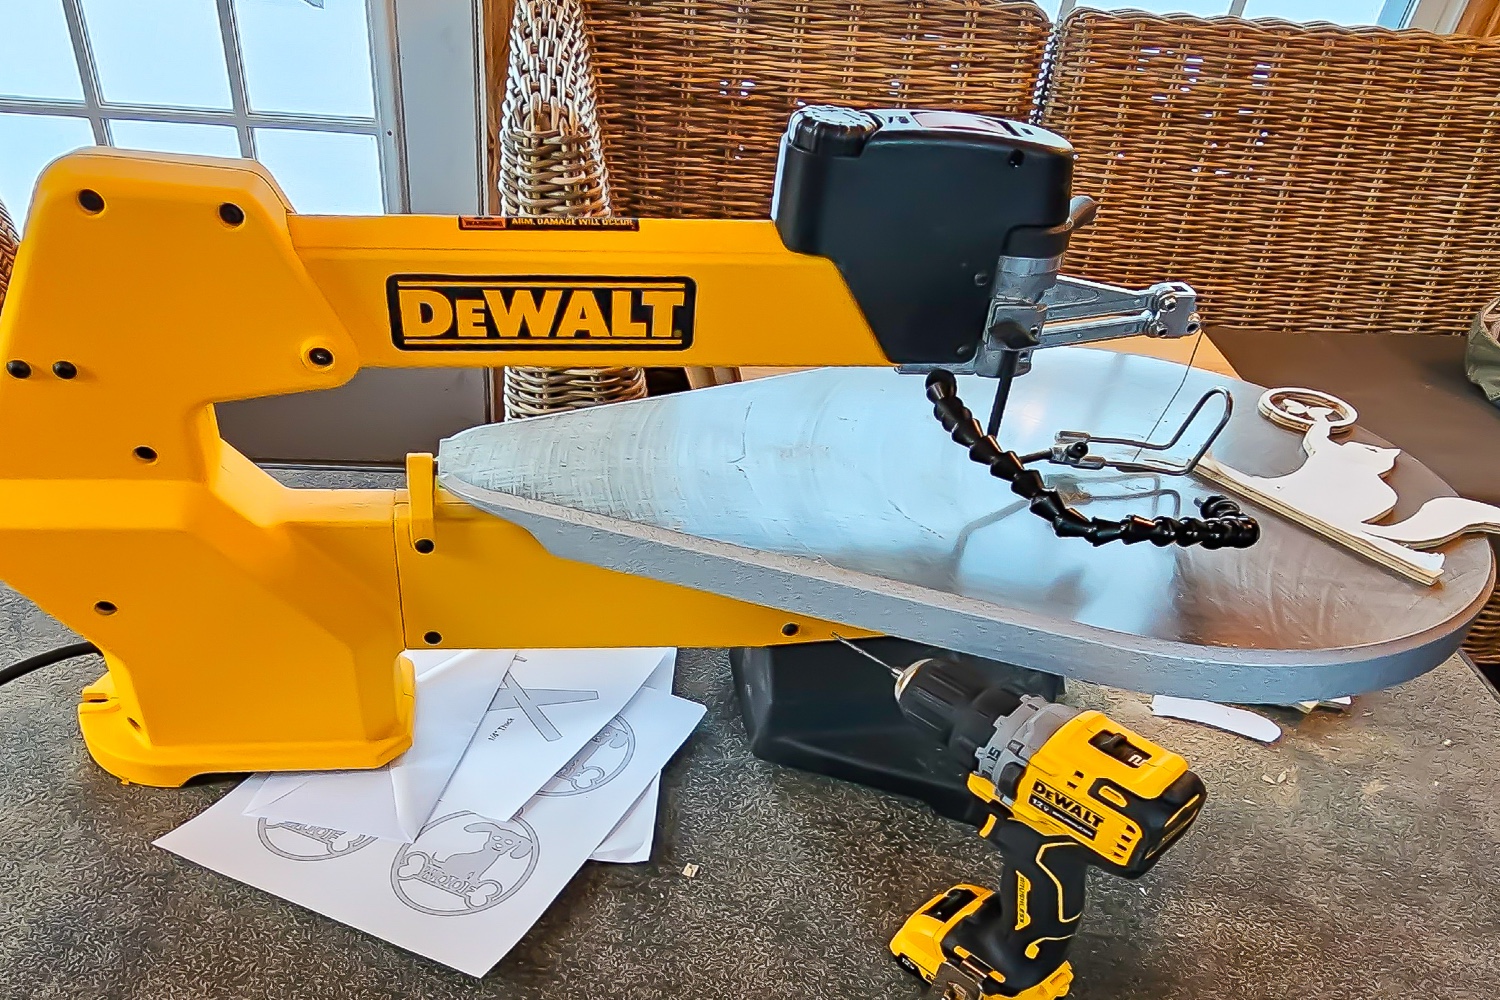 The DeWalt 20-Inch Variable-Speed Scroll Saw set up on a workbench with a drill and several patterns.